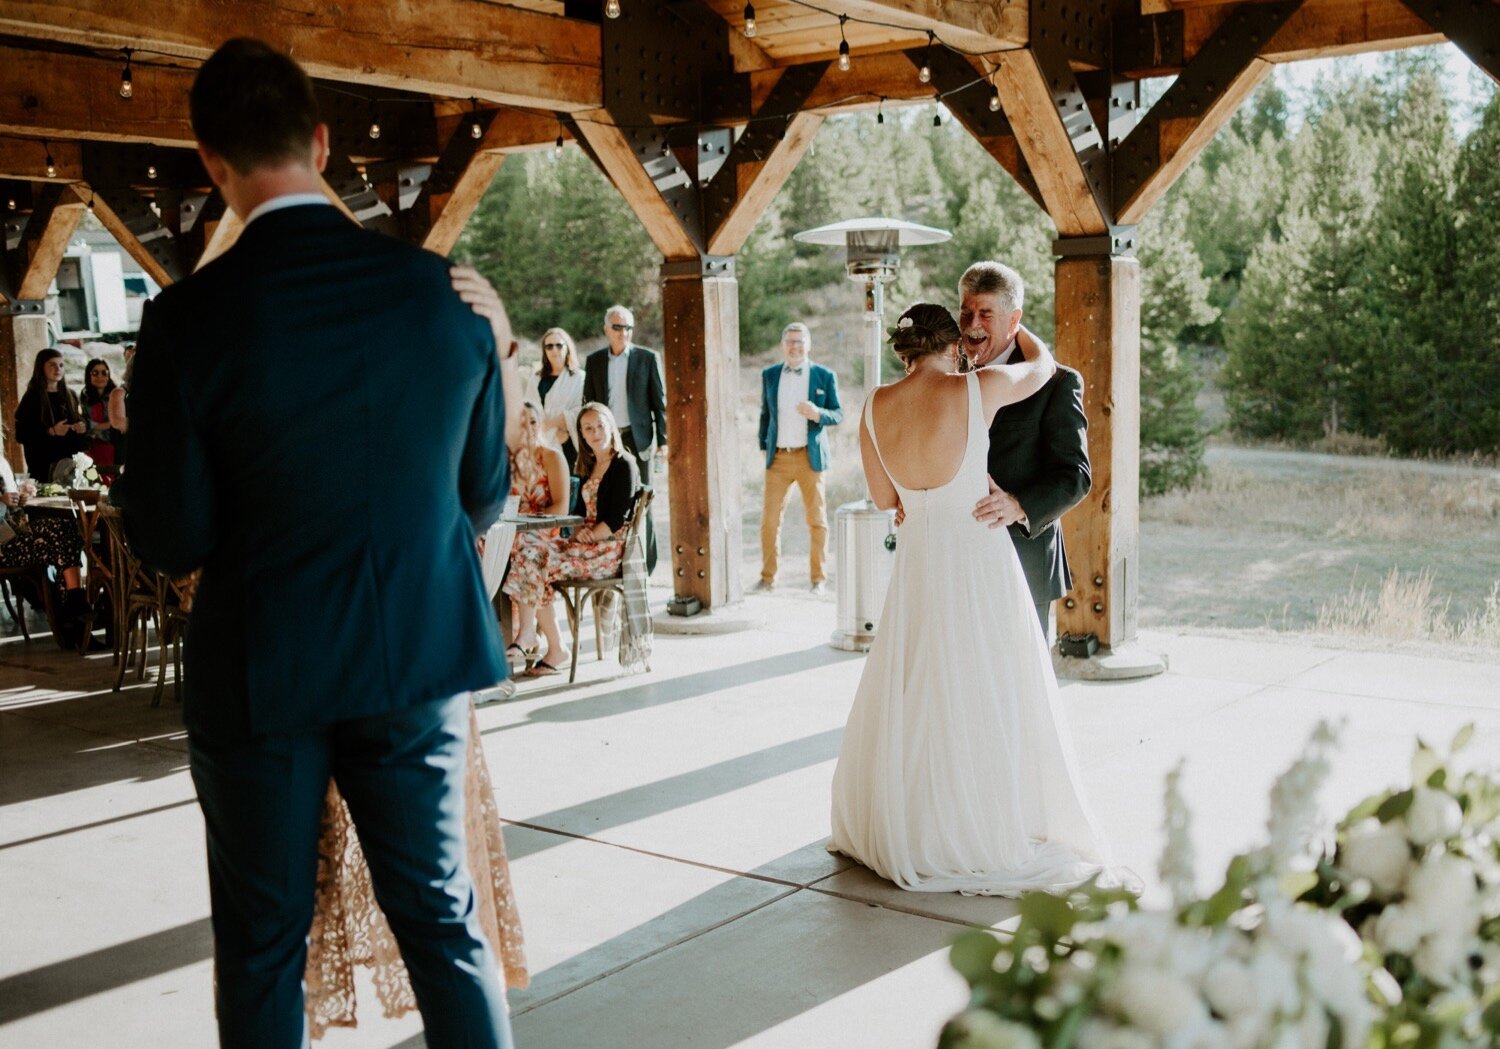  Mother son dance, father daughter dance, Wedding Reception, Windy Point Campground Wedding Colorado, Dillon Colorado Wedding, Colorado mountain wedding, Dillon Colorado Wedding Photographer, Colorado Wedding Photographer, Colorado mountain wedding v